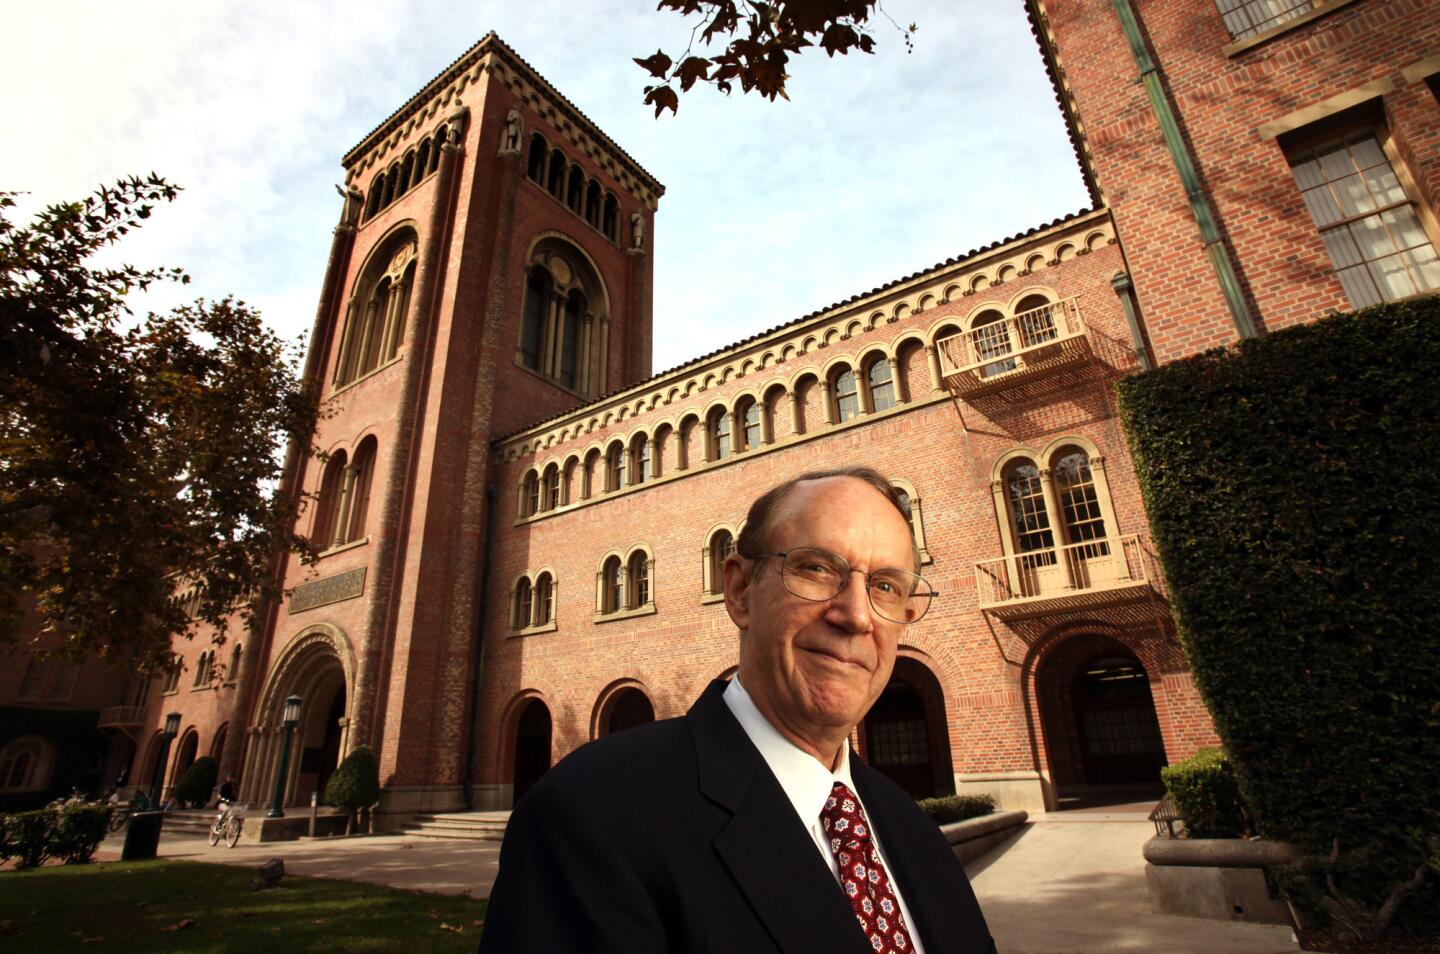 Steven Sample, the former president of USC who left a legacy of transformation, poses on campus on Oct. 27, 2009.